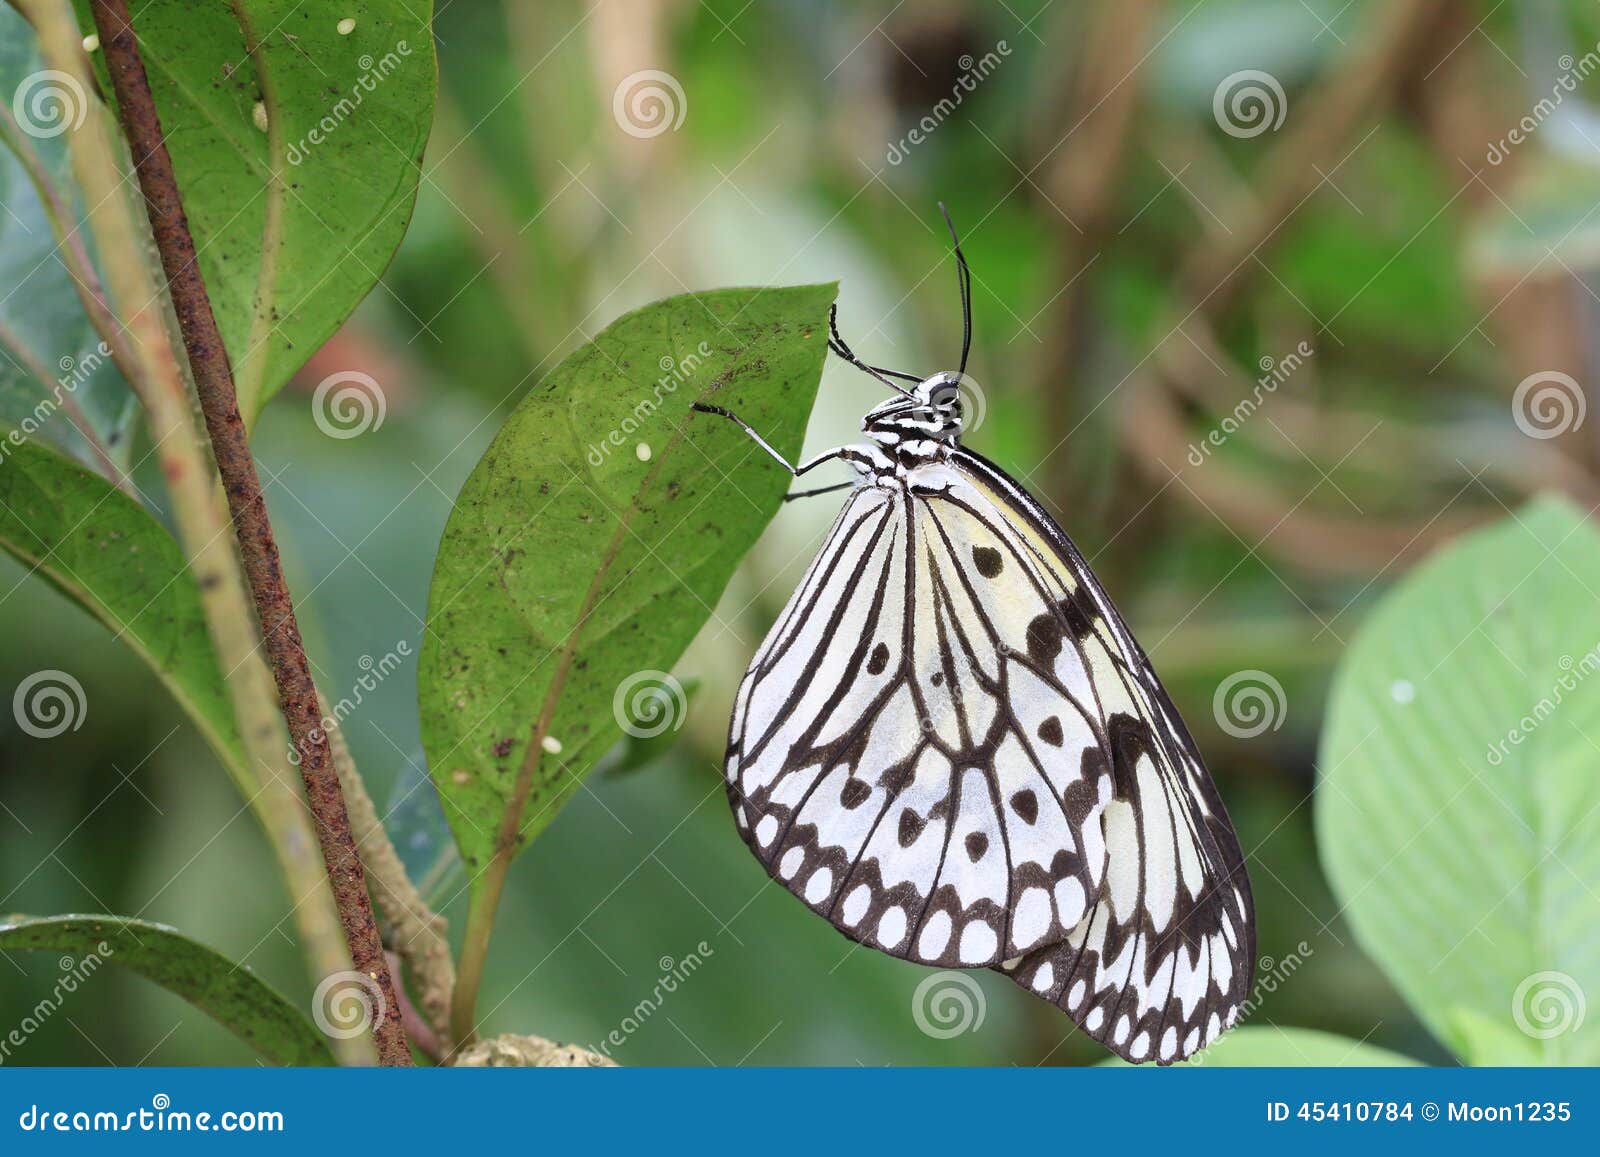 Large Tree Nymphs Butterfly and Eggs Stock Photo - Image of ...